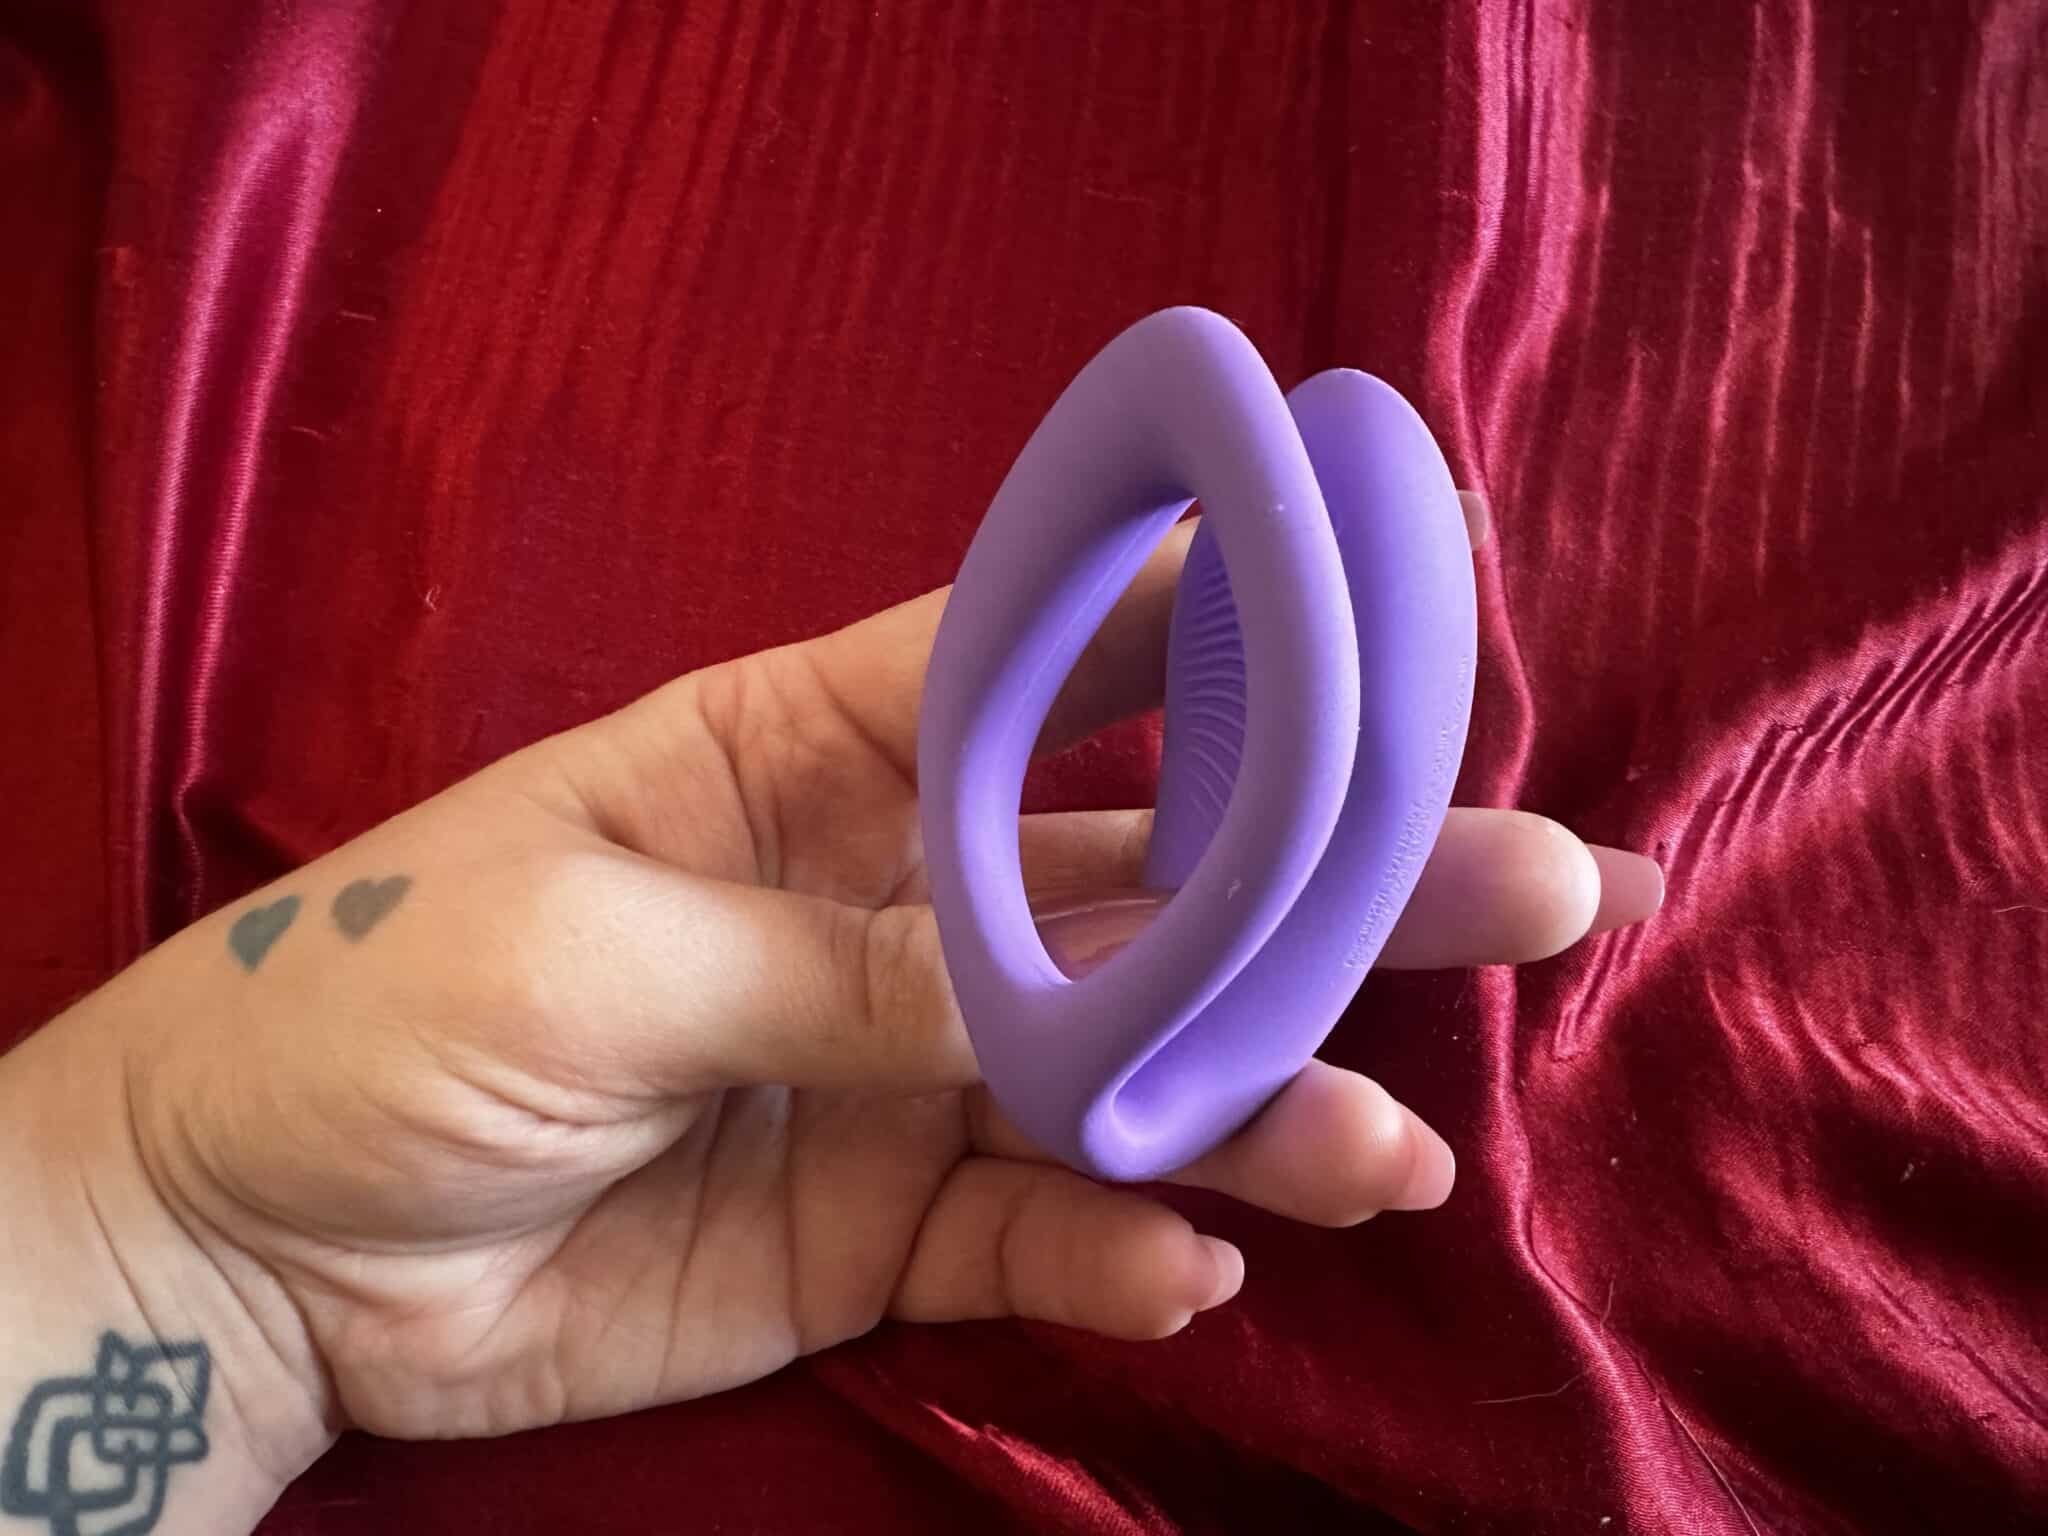 We-Vibe Sync O User-Friendliness: A Deep Dive into the We-Vibe Sync O